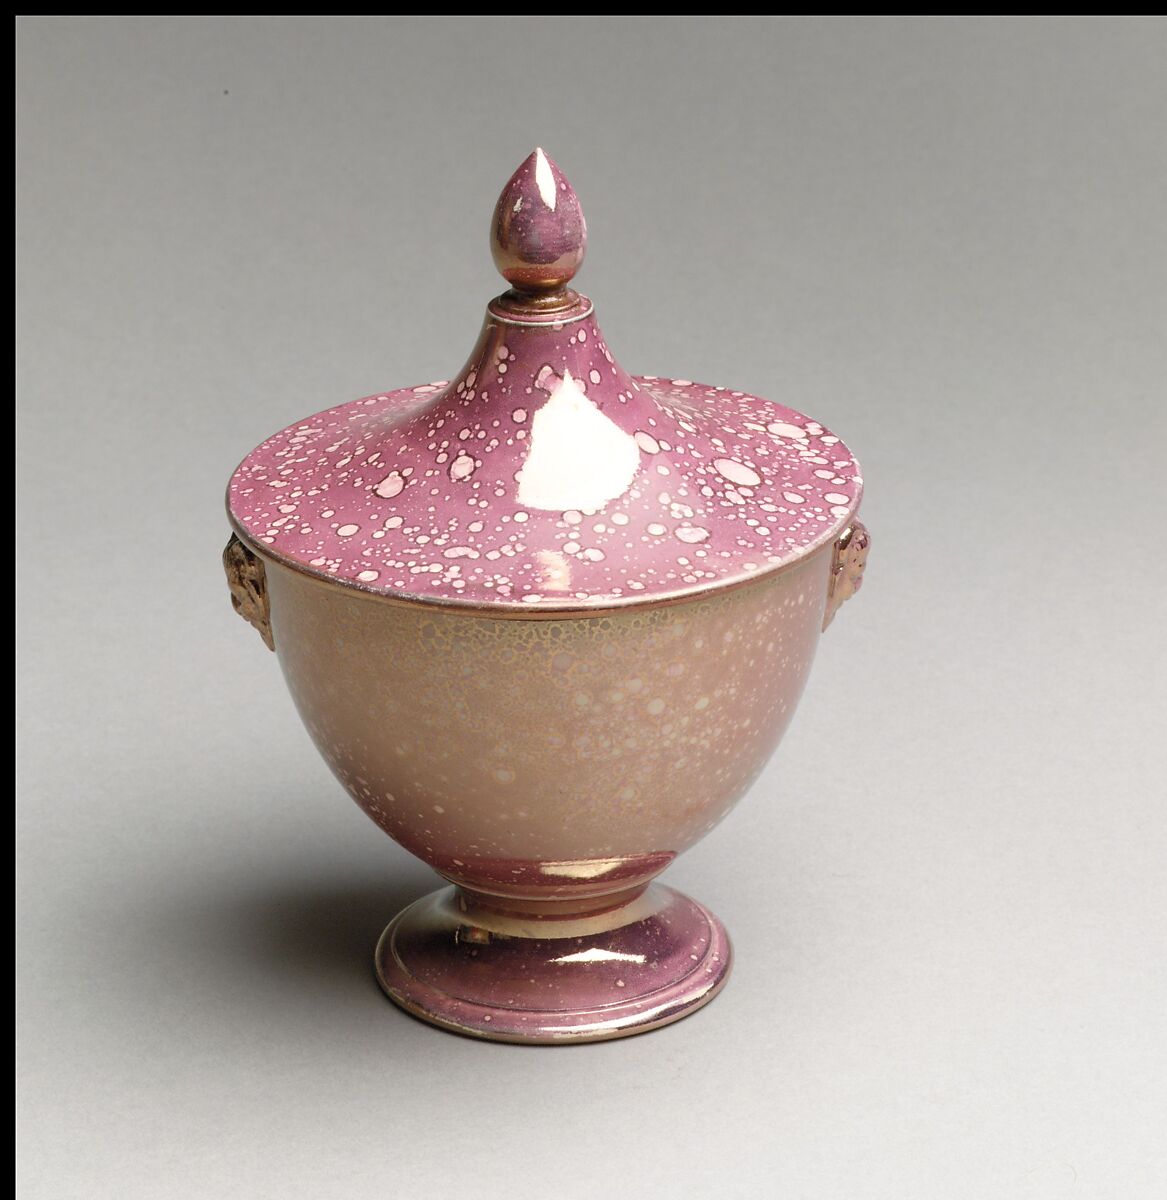 Sugar with cover (part of a set), Lustreware, French, Sarreguemines 